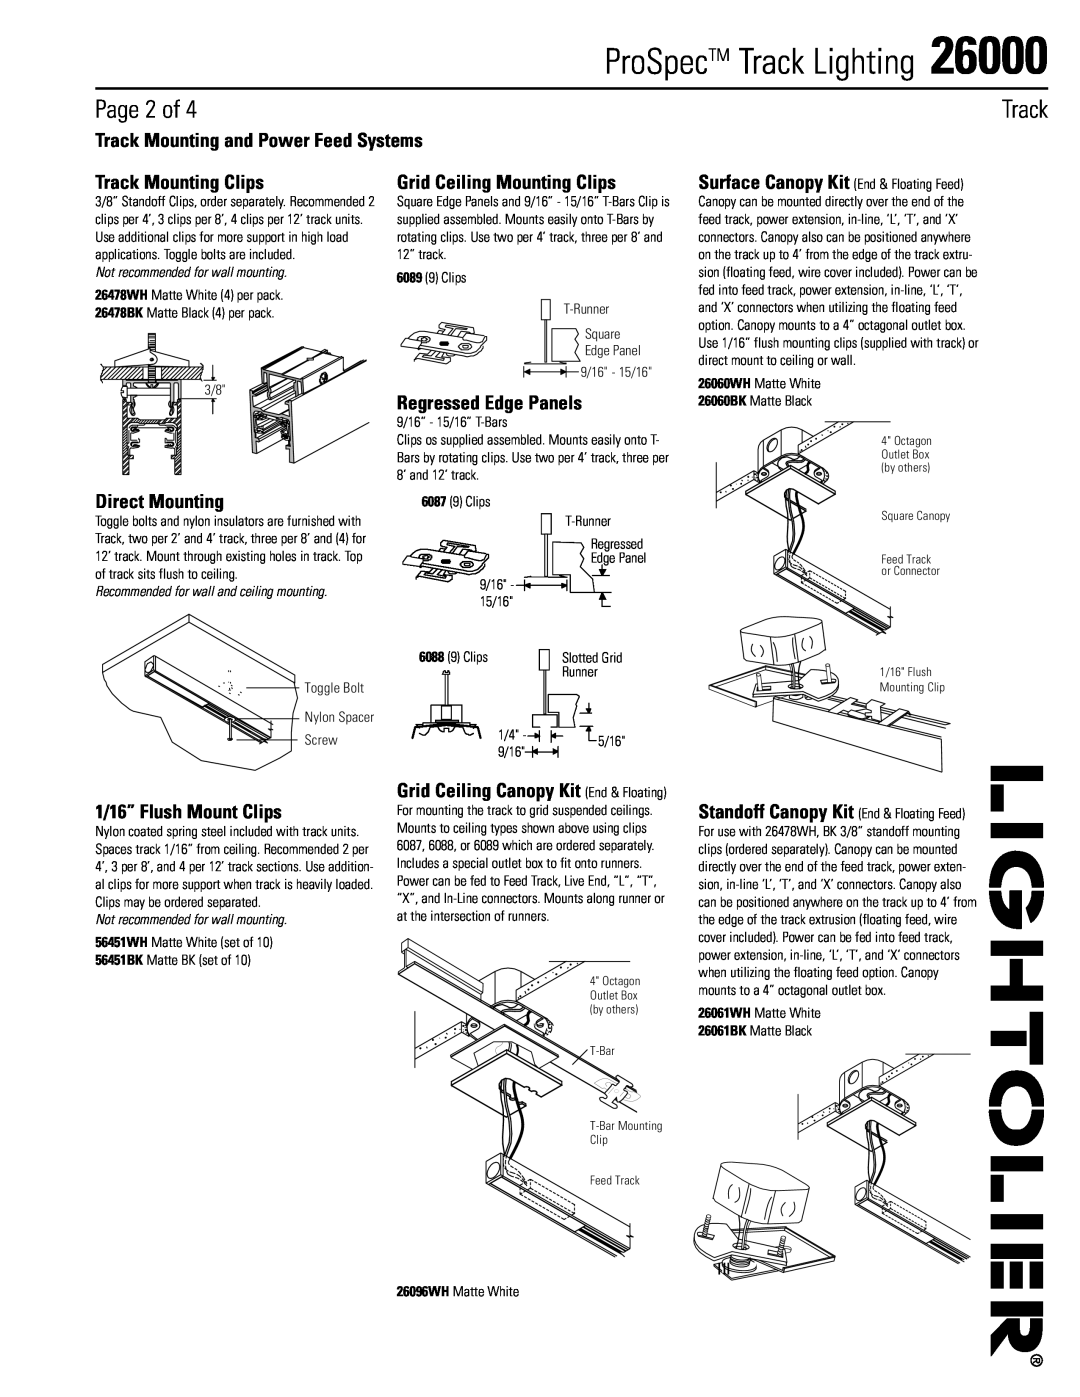 Lightolier 26000 Page 2 of, Track Mounting and Power Feed Systems, Track Mounting Clips, Grid Ceiling Mounting Clips 